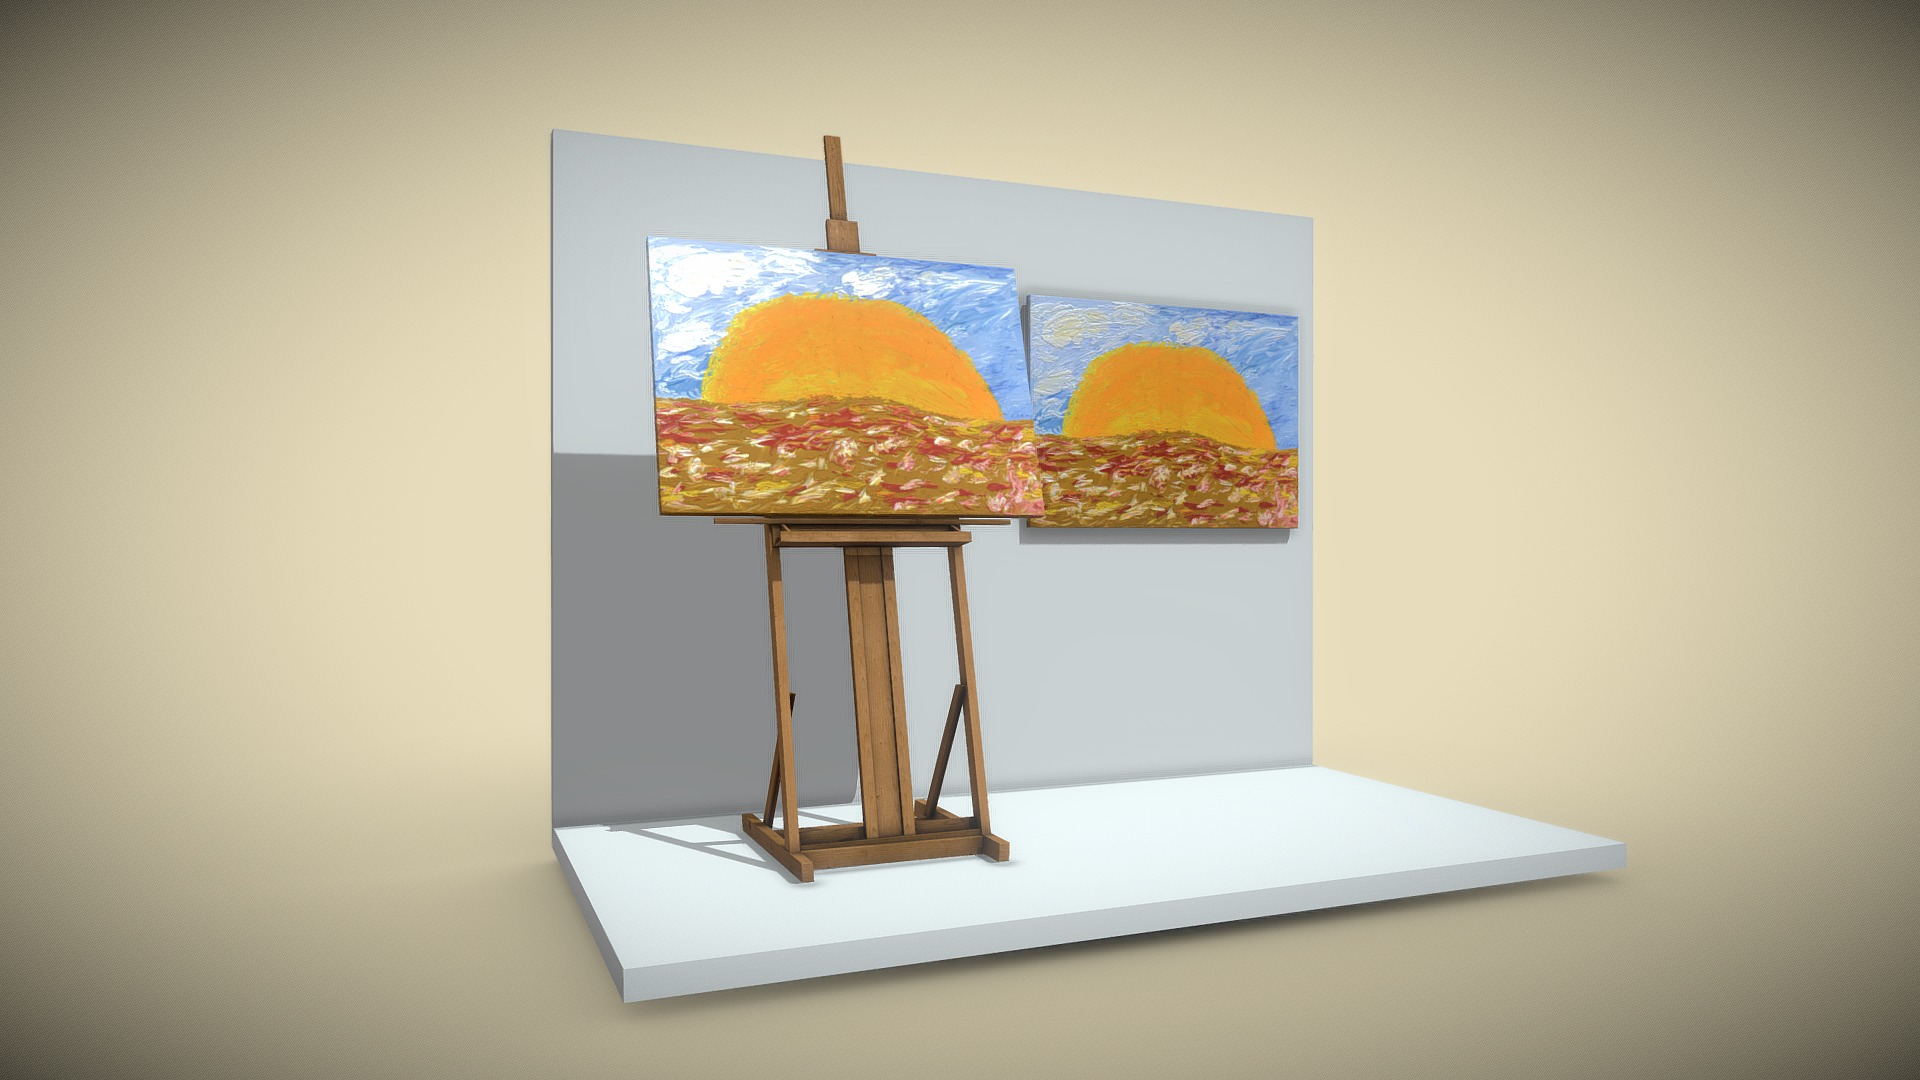 3D model Sunrise – Oil Painting - This is a 3D model of the Sunrise - Oil Painting. The 3D model is about a painting on a wall.